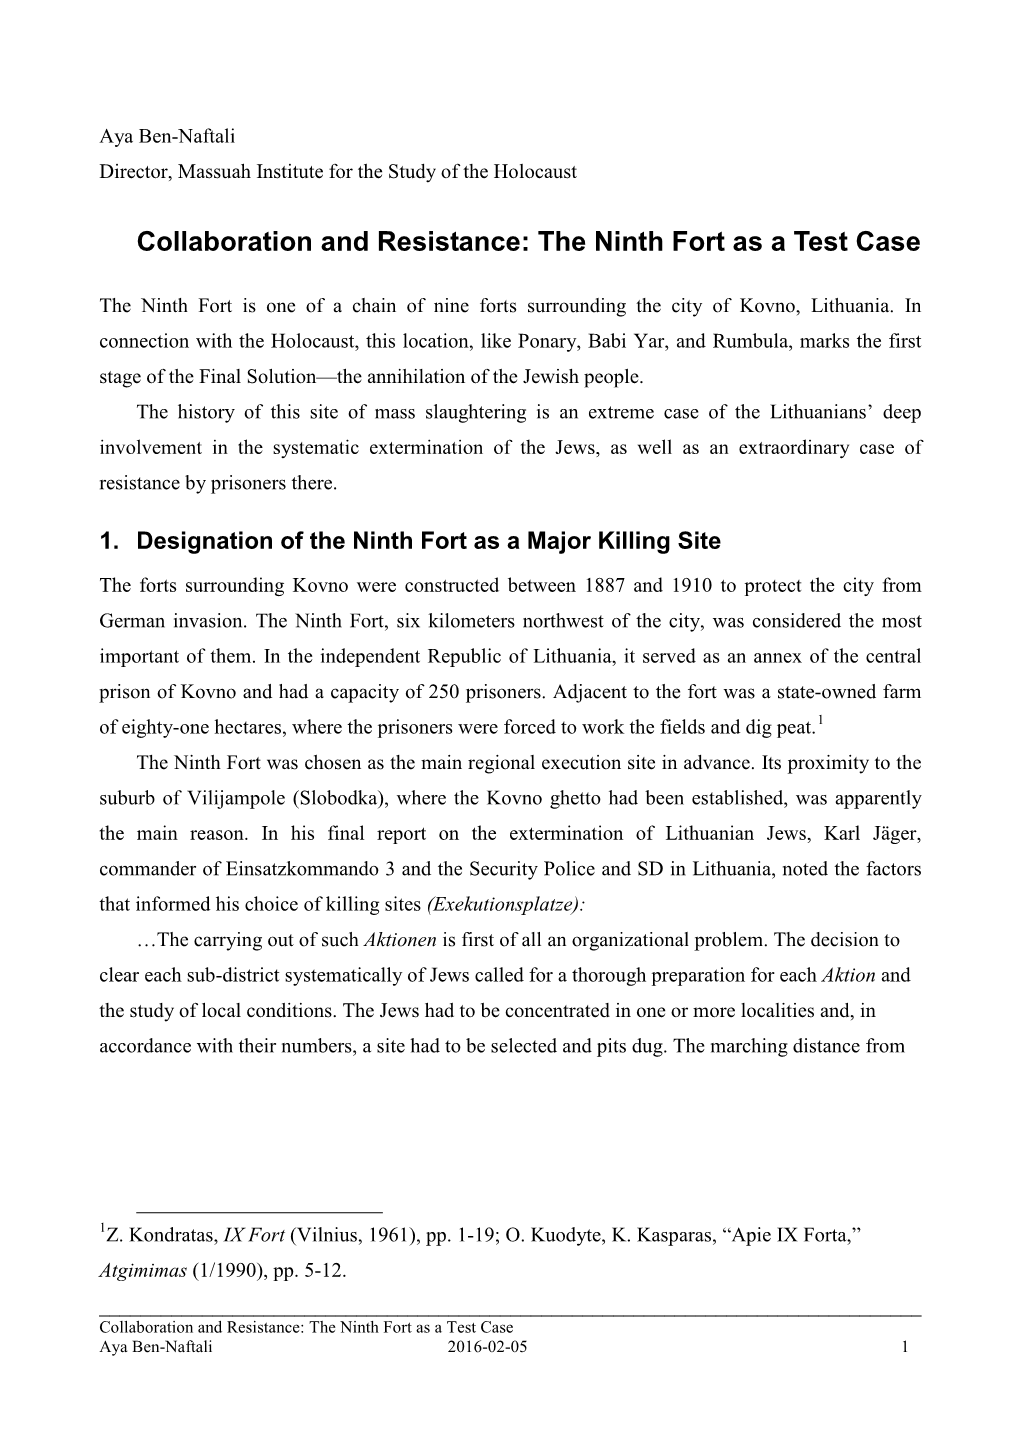 Collaboration and Resistance—The Ninth Fort As a Test Case